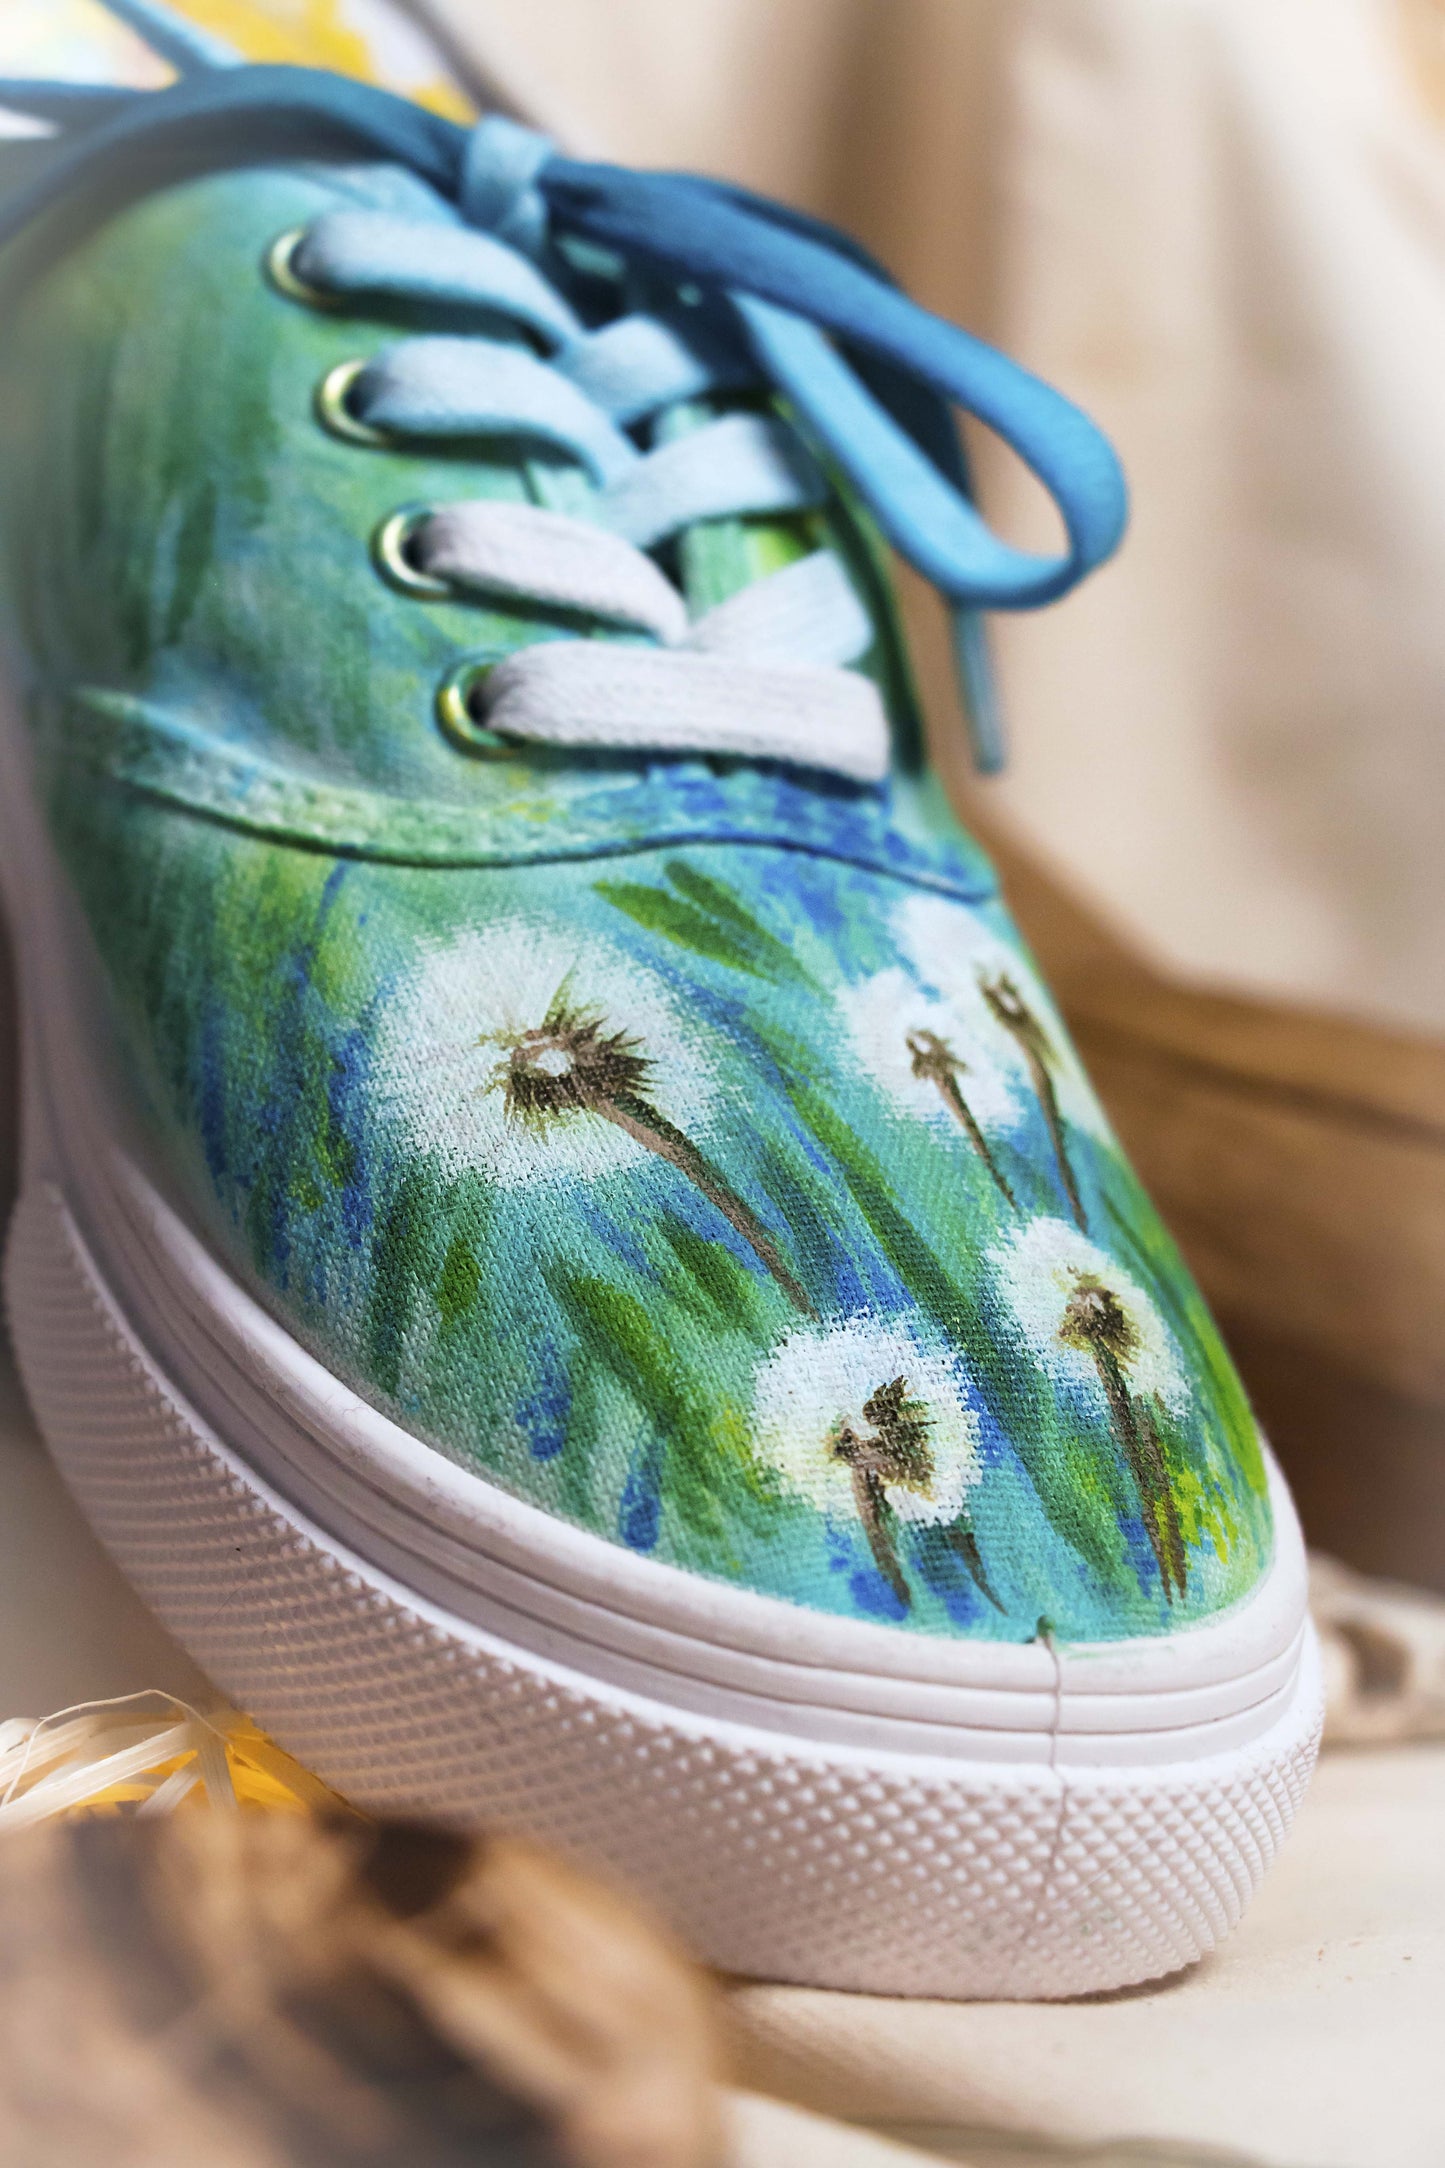 Tenisi Pictati, Painted Sneakers, Pictura Manuala Tenisi, handmade shoes, Everyday shoes, Woman Fashion, customized shoes, Dandelion, Splash paint, Papadie, Papadie pictata, siteseeing painted